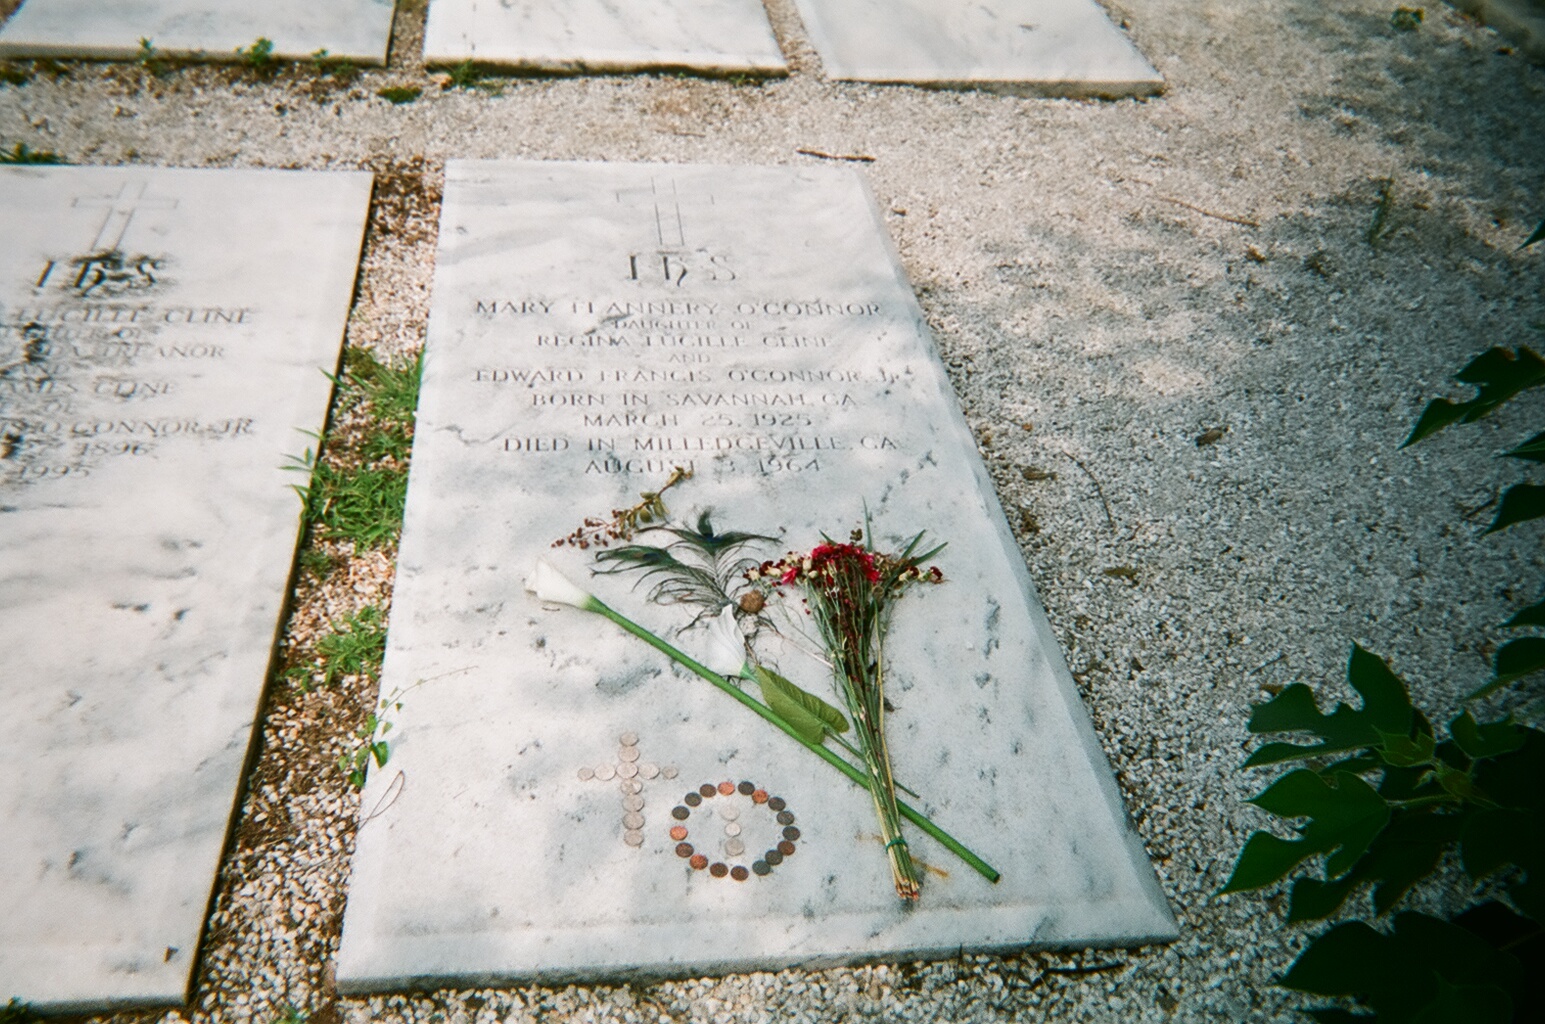 flannery o'connor grave